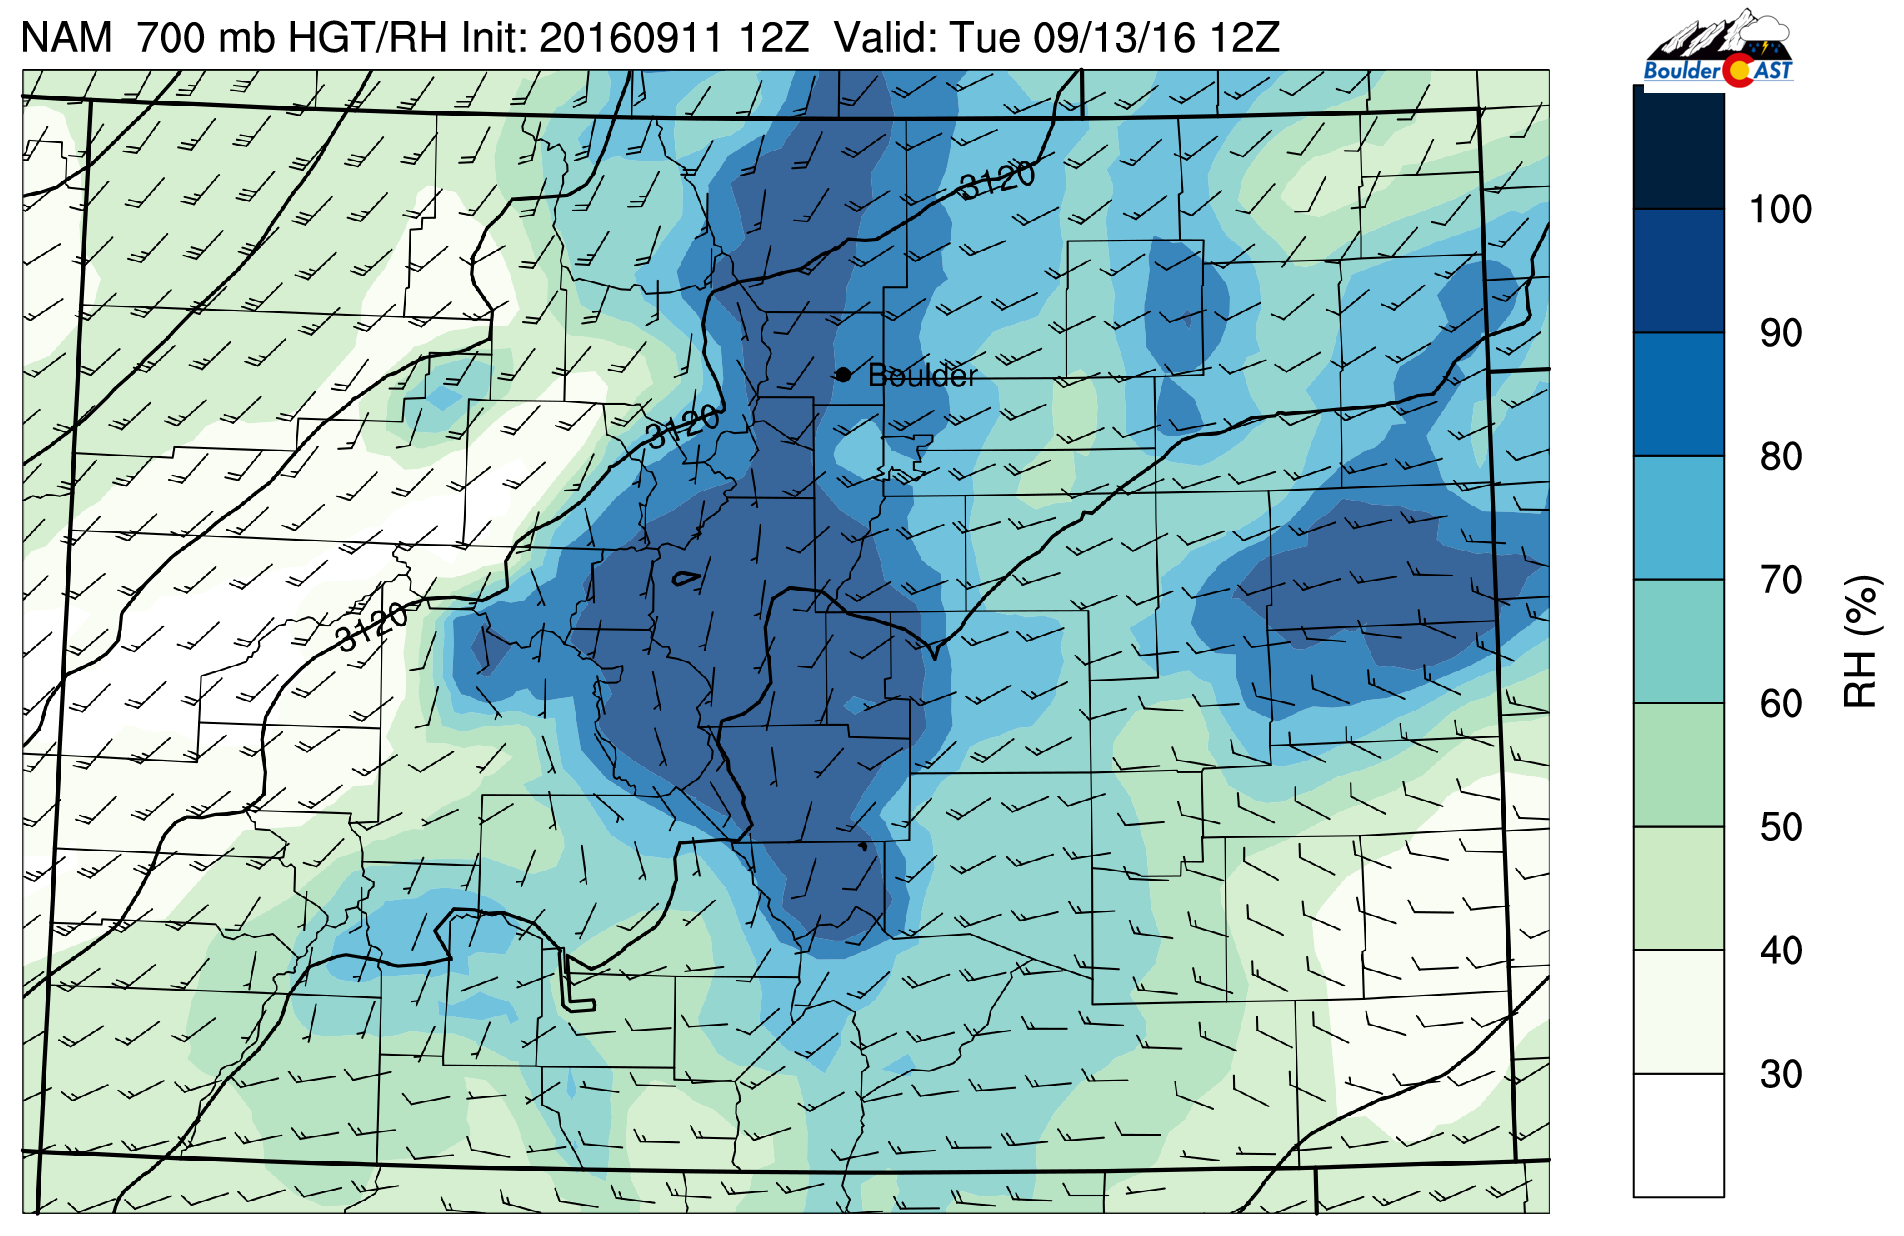 NAM 700 mb relative humidity and wind speeds for Tuesday morning